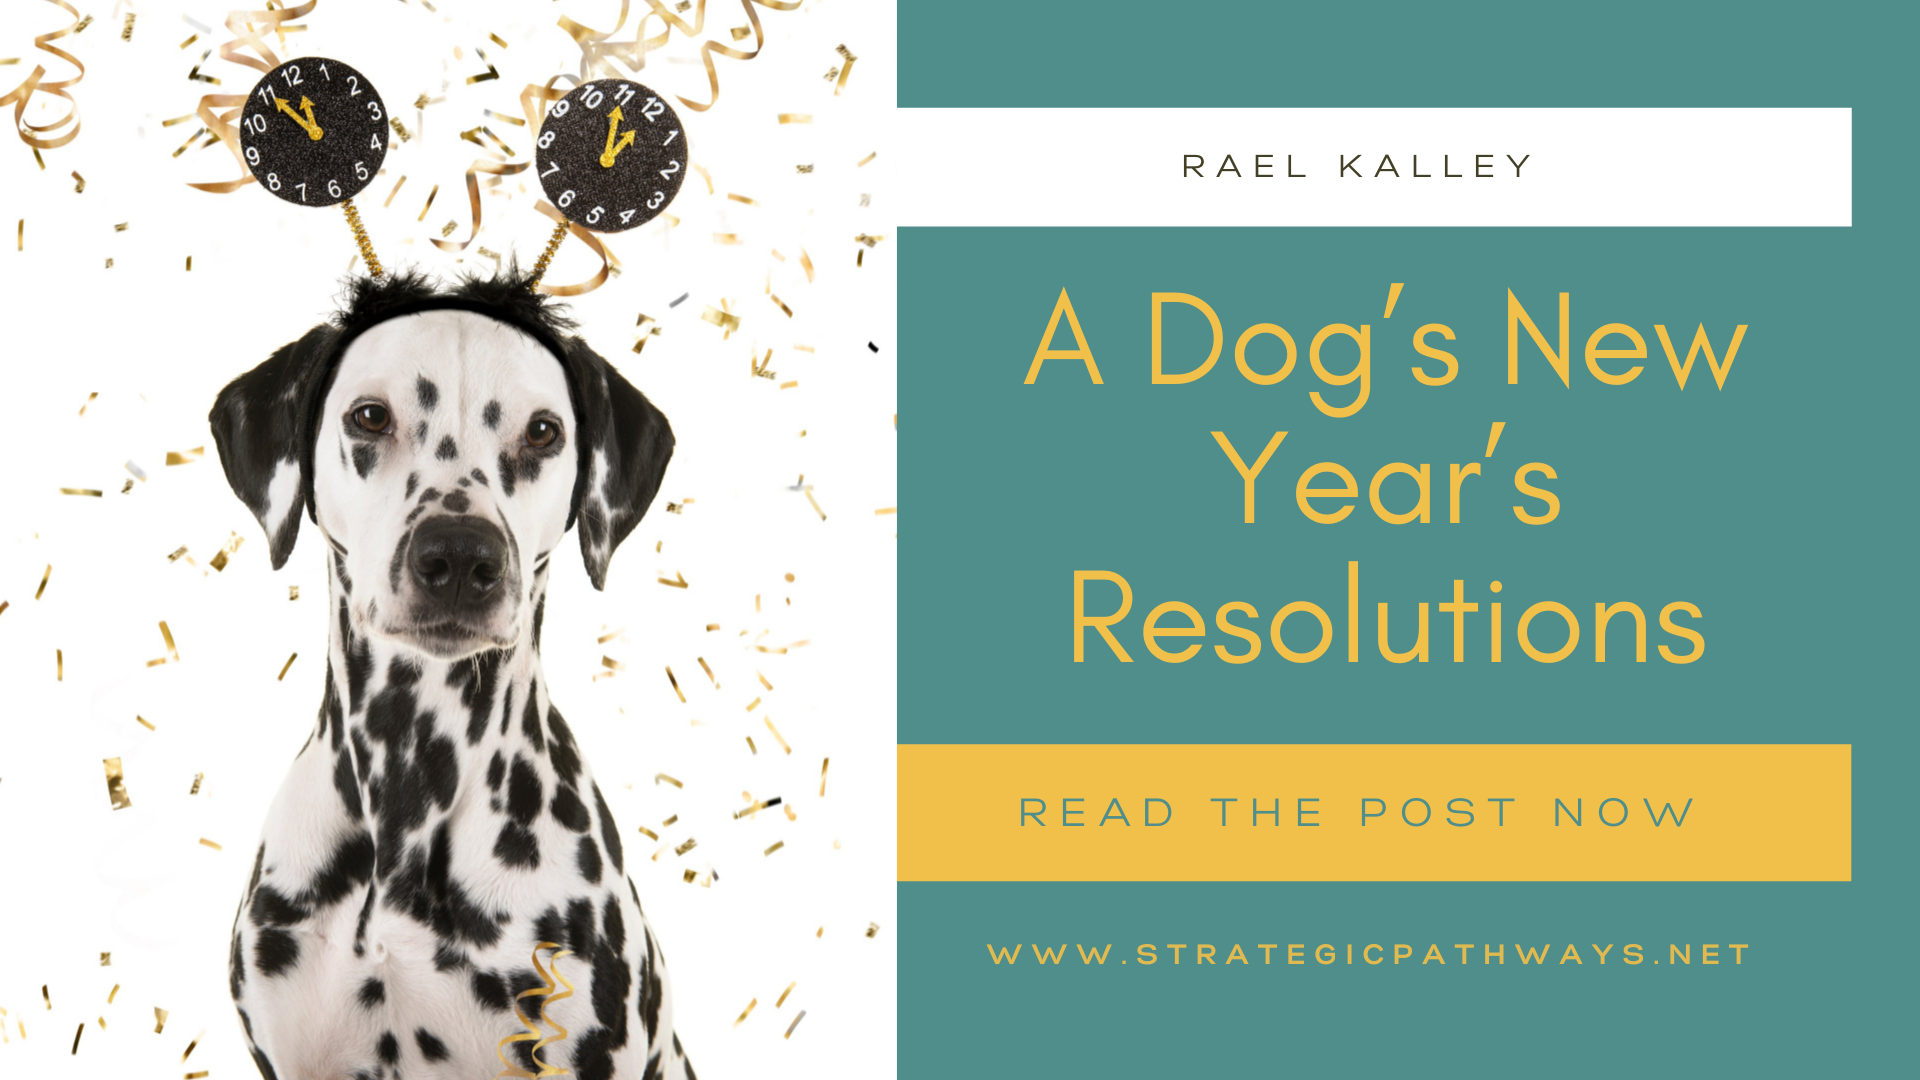 A dog's new year's resolutions